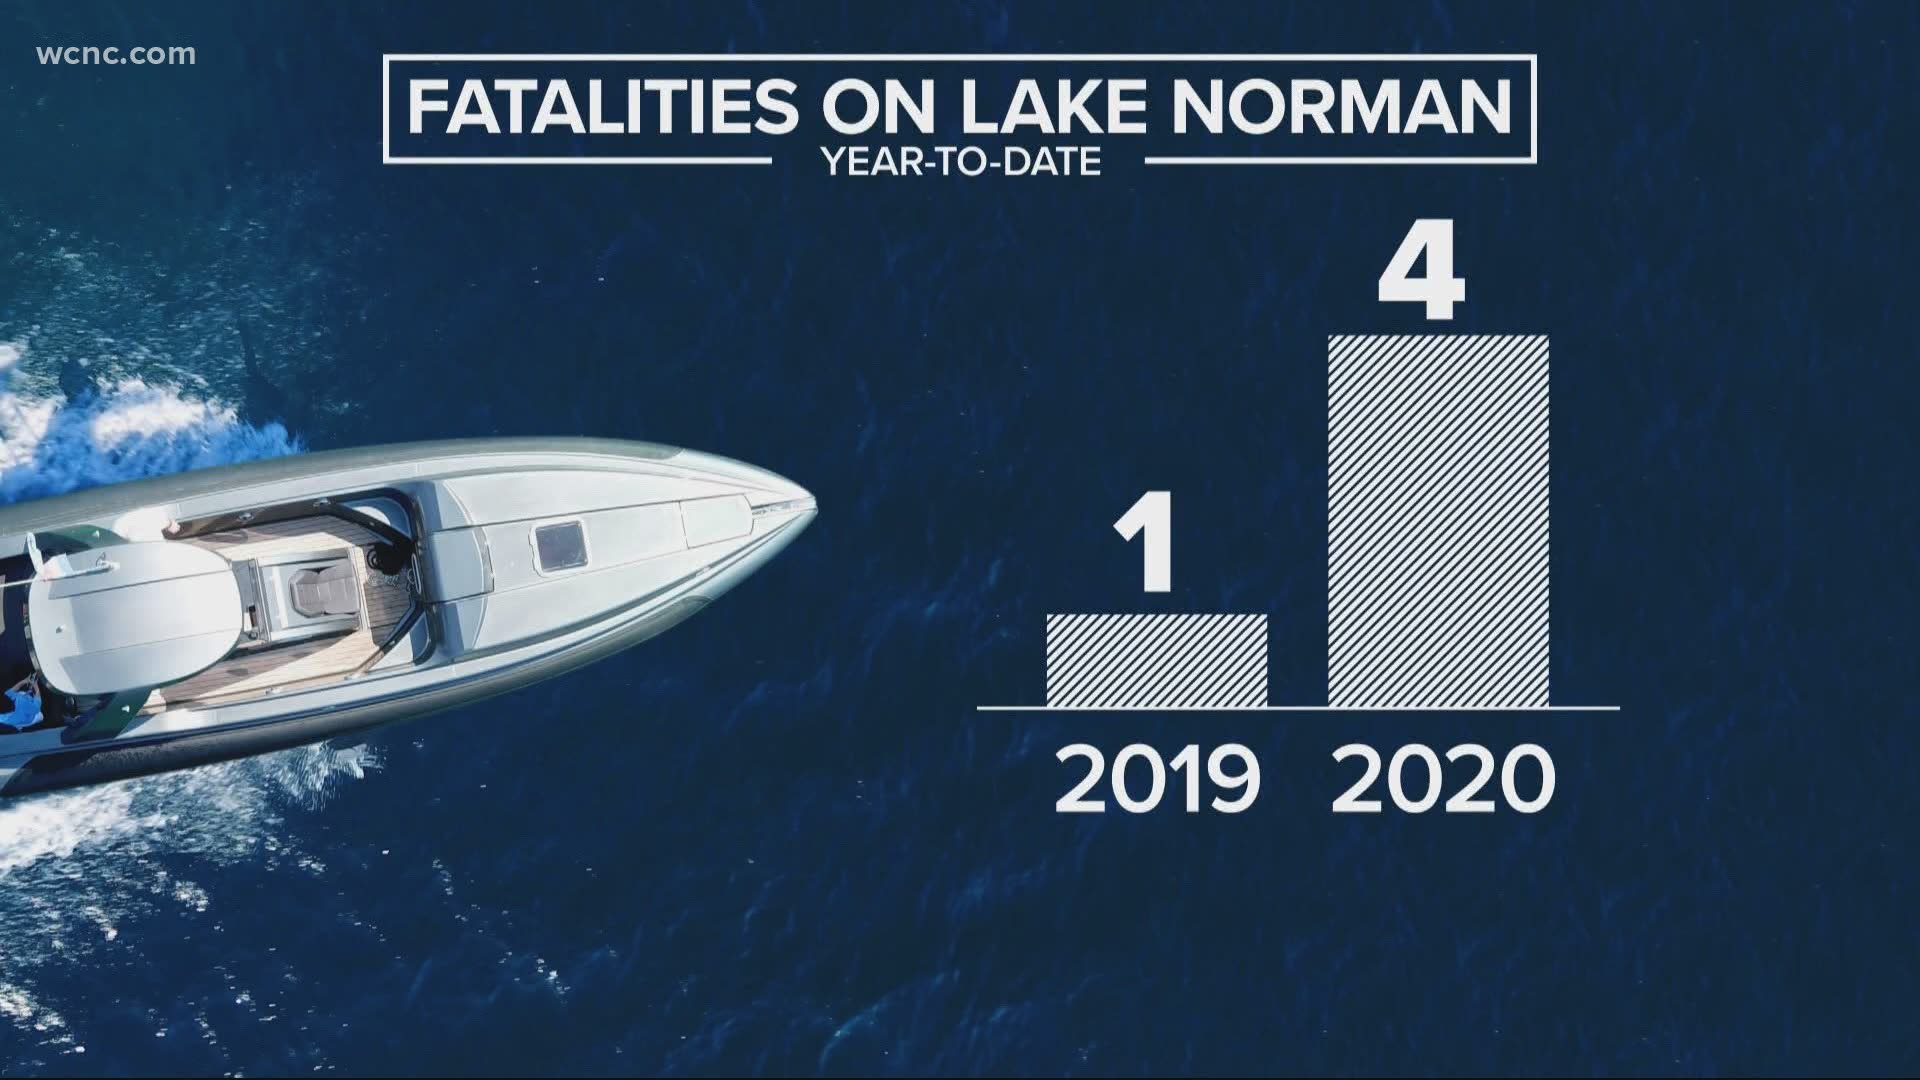 After recent drownings, first responders warn lake-goers ahead of the holiday weekend